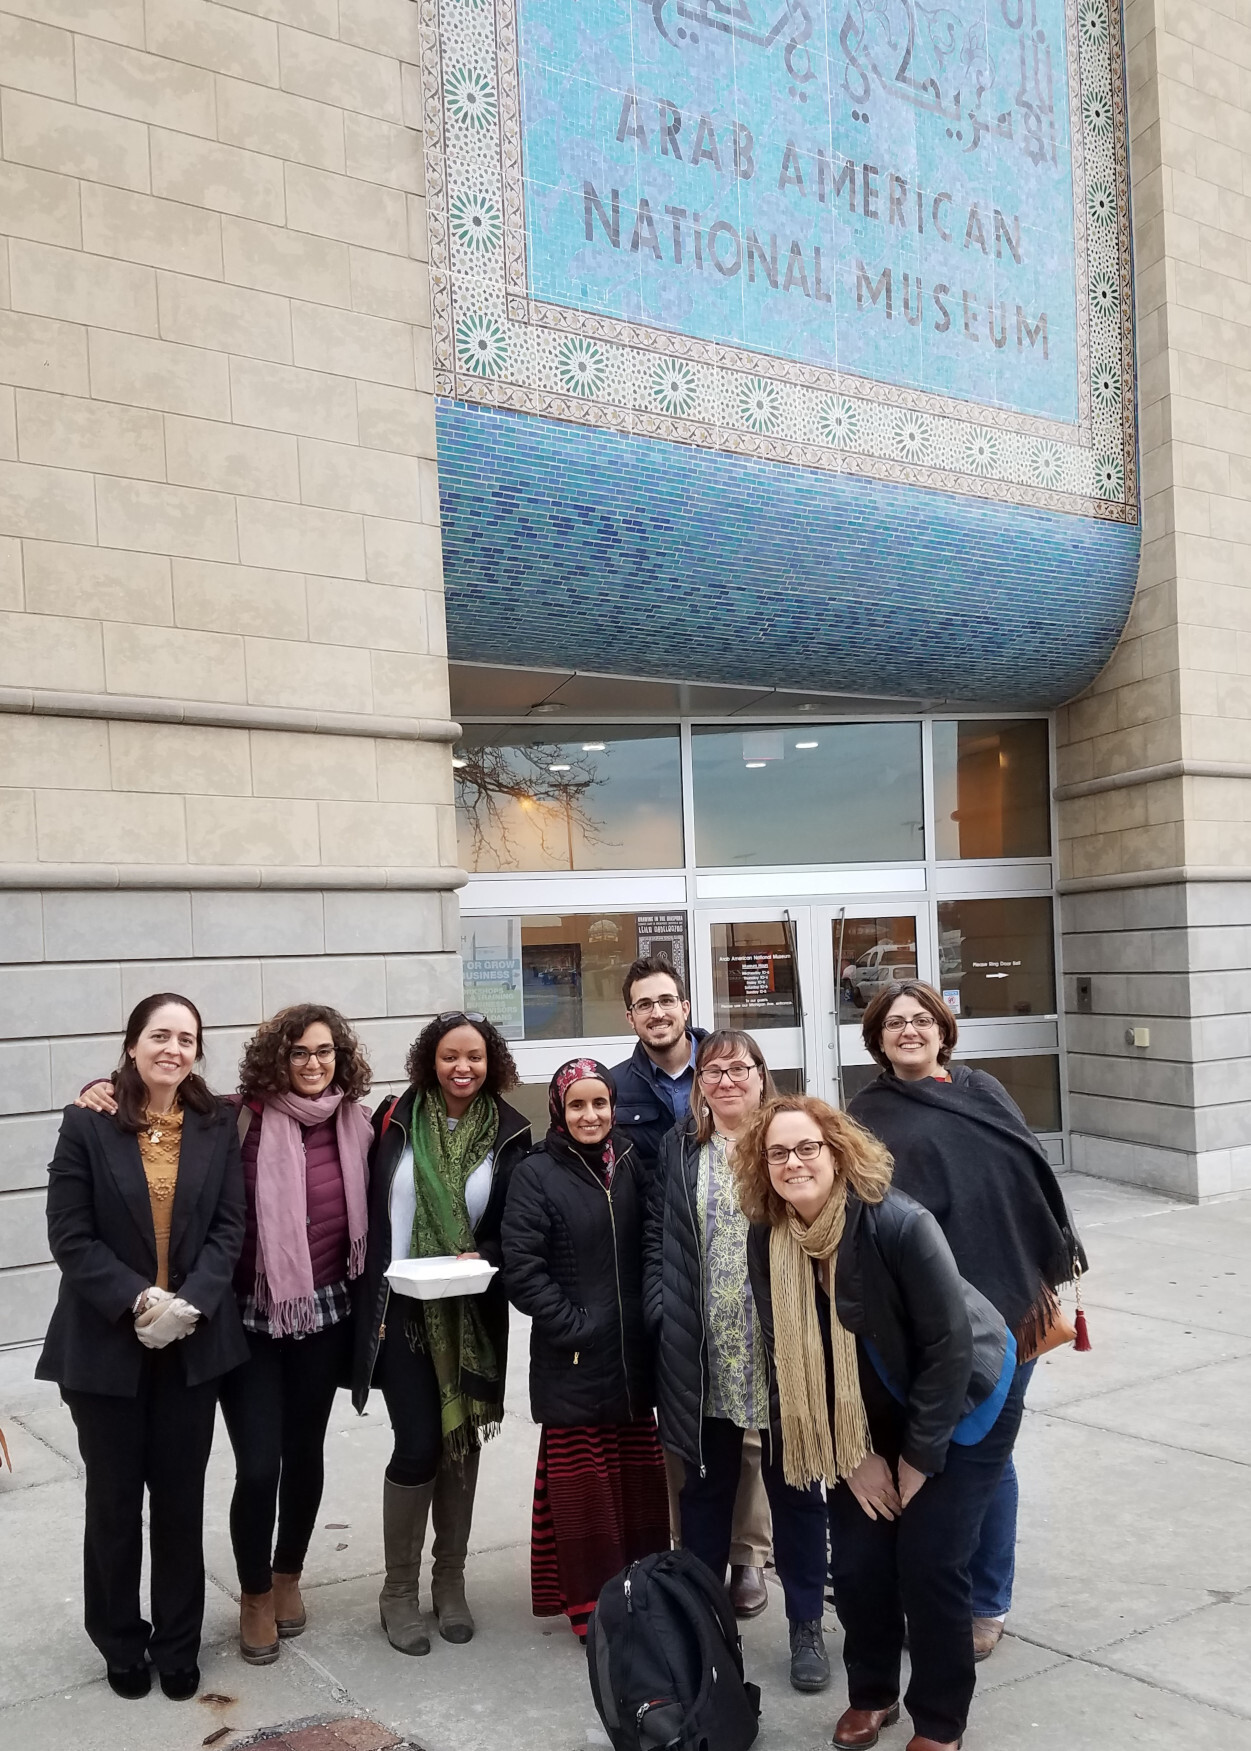 Scholars convene to participate in community discussions about developing a new exhibit for the museum. Image courtesy Arab American National Museum.